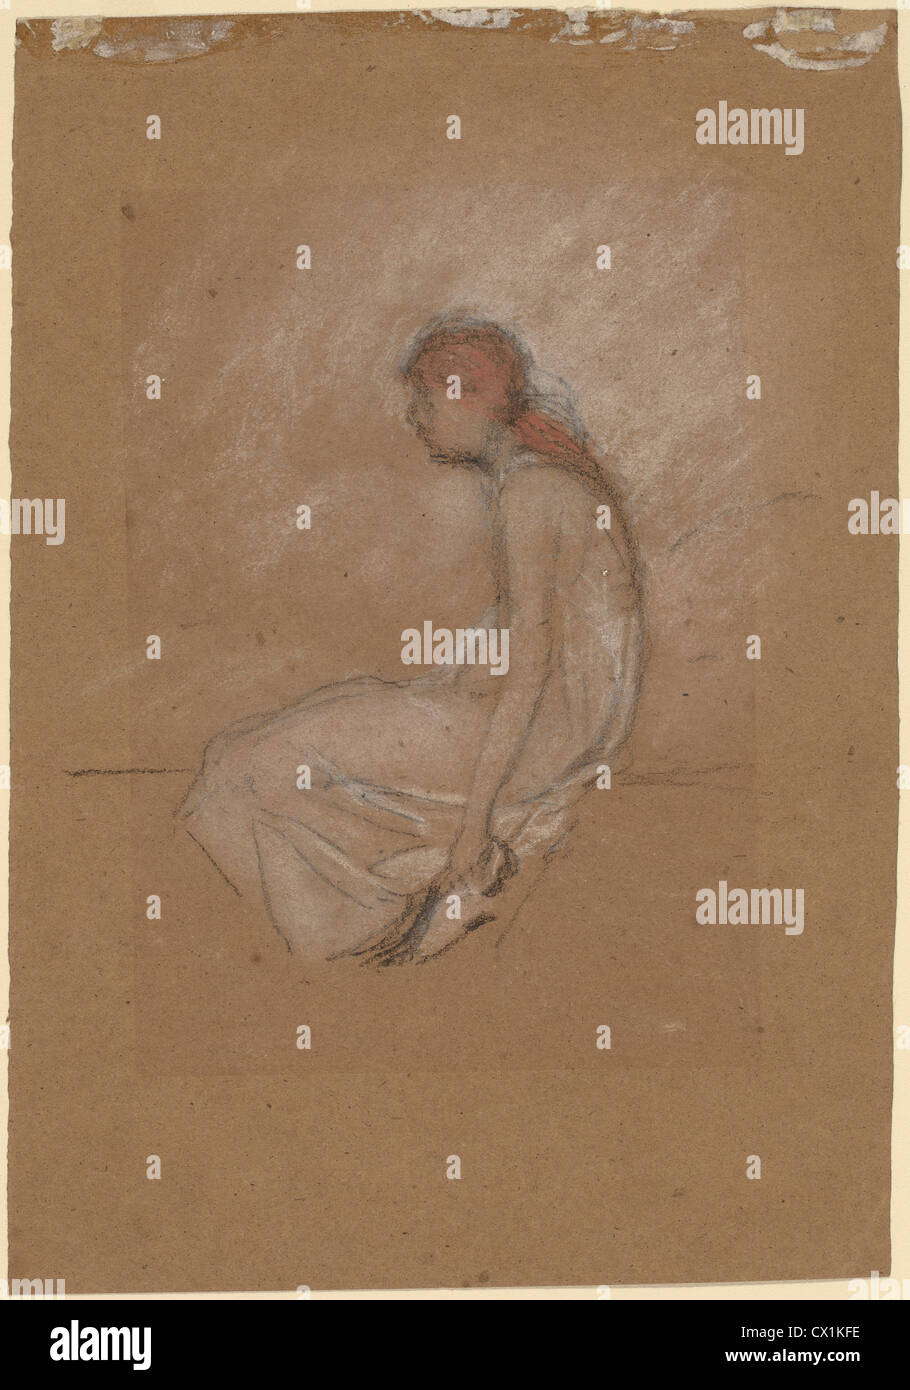 James McNeill Whistler, Seated Woman with Red Hair, American, 1834 - 1903, 1870/1873, pastel and chalk on brown paper Stock Photo